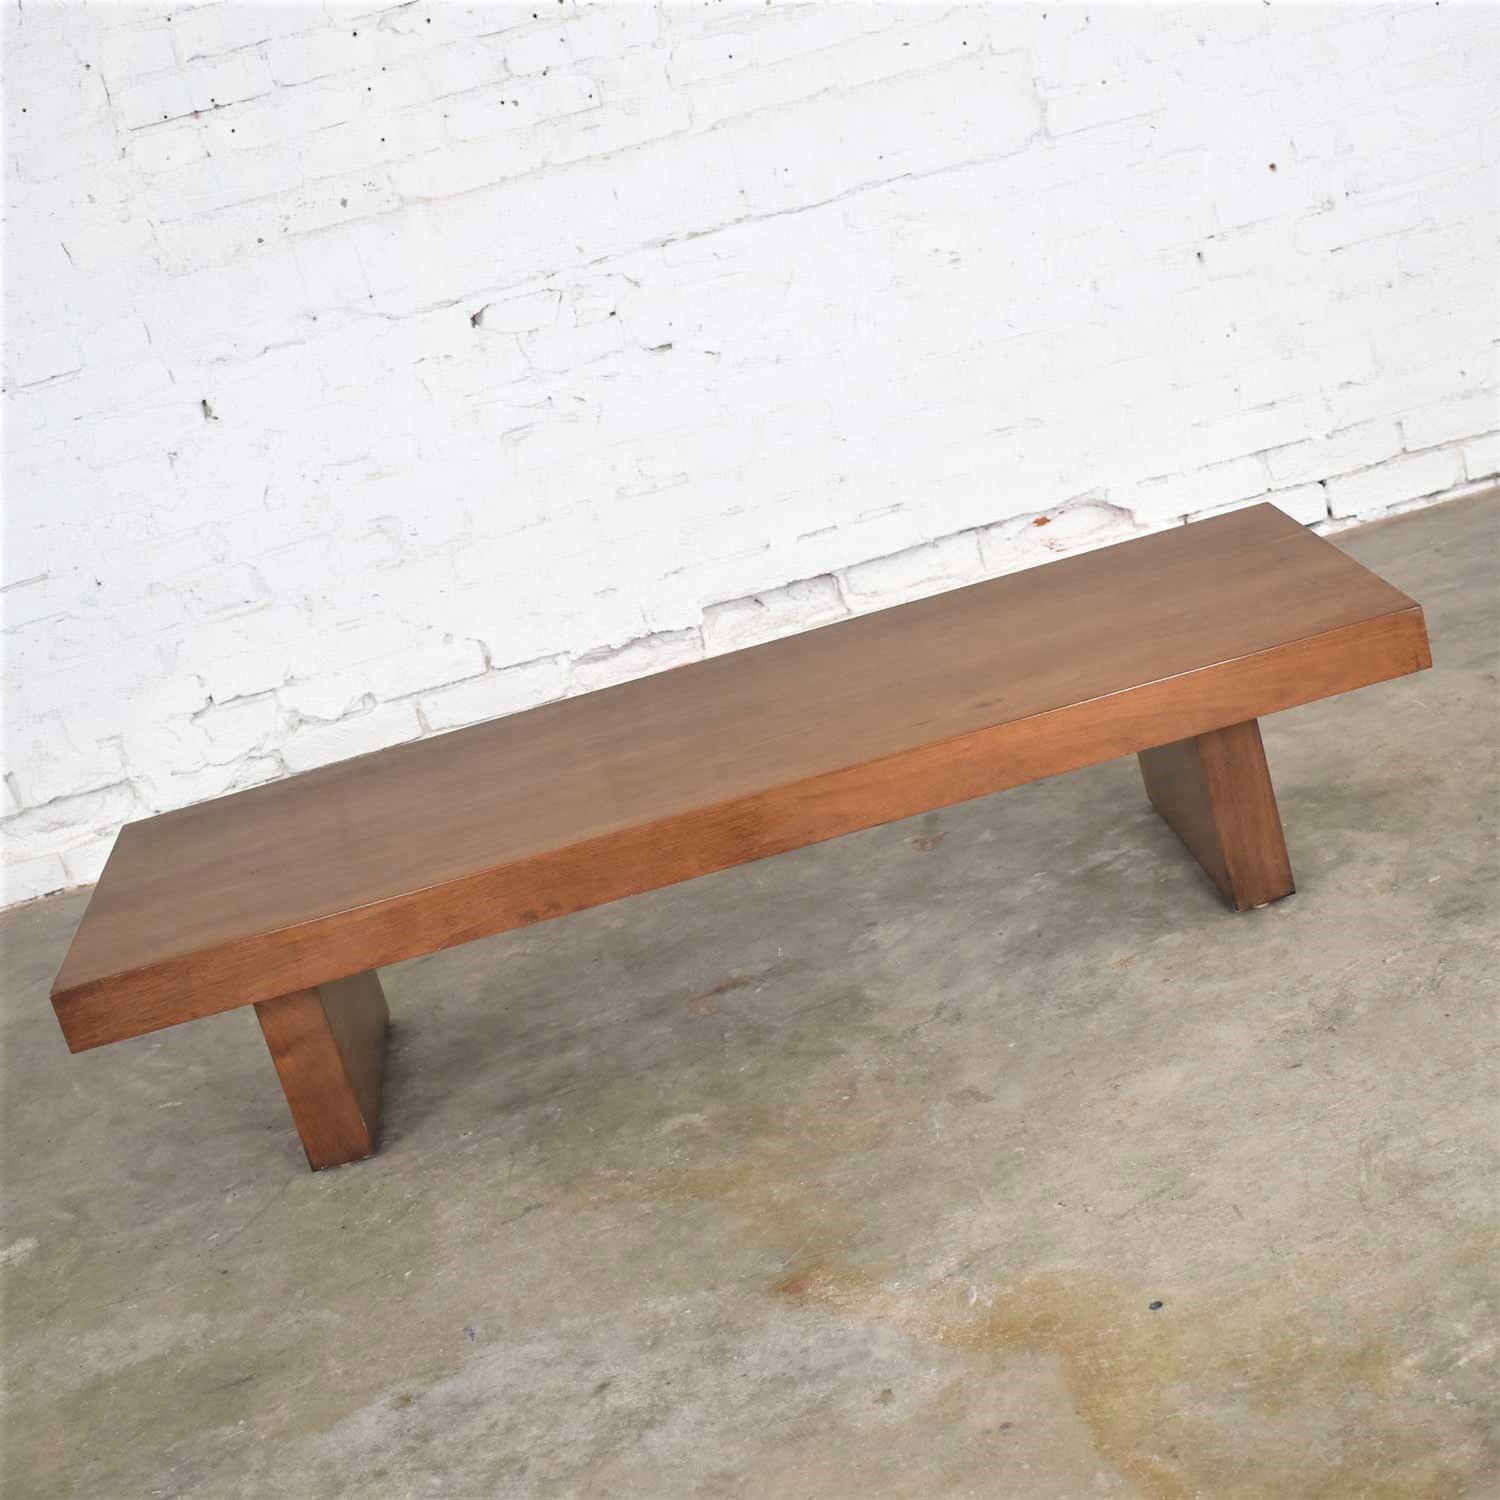 Handsome Mid-Century Modern or Asian style low coffee table, cocktail table, bench, or Teahouse Table, as it is titled on its label along with Show-Pieces which we assume is the maker or brand. Solidly constructed of wood with walnut veneer. It is